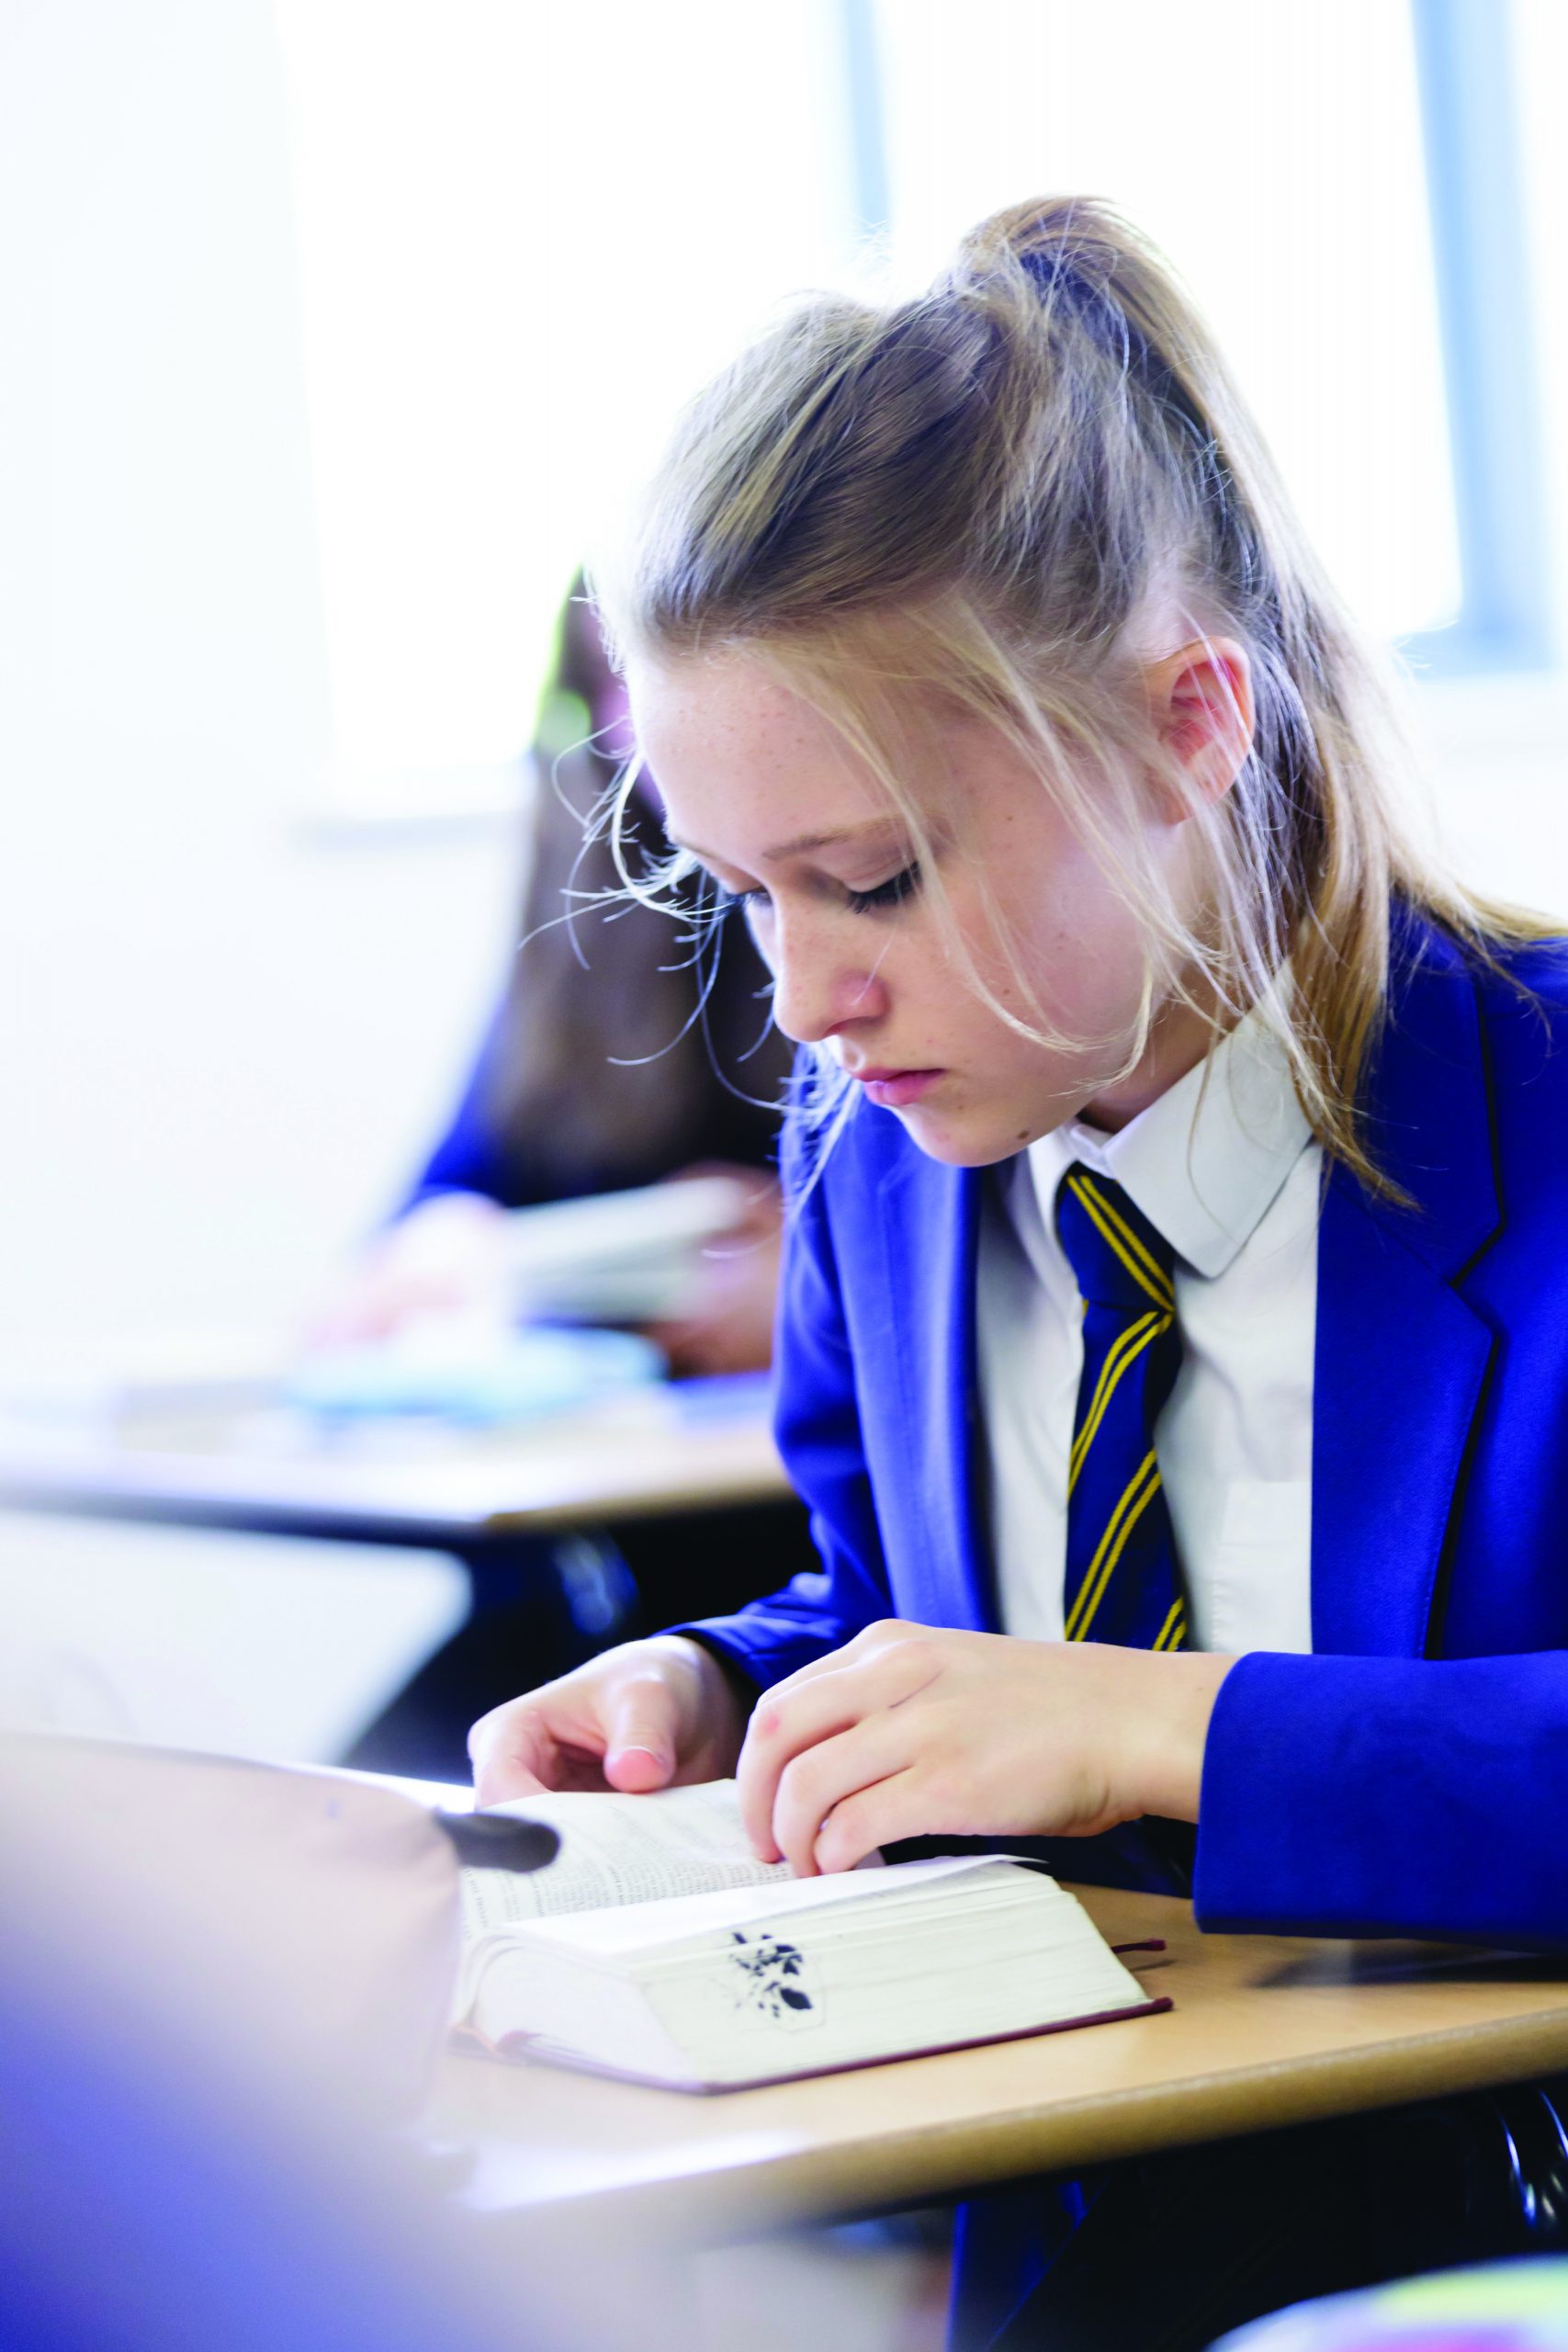 A girl in school uniform sitting at a desk reading a book